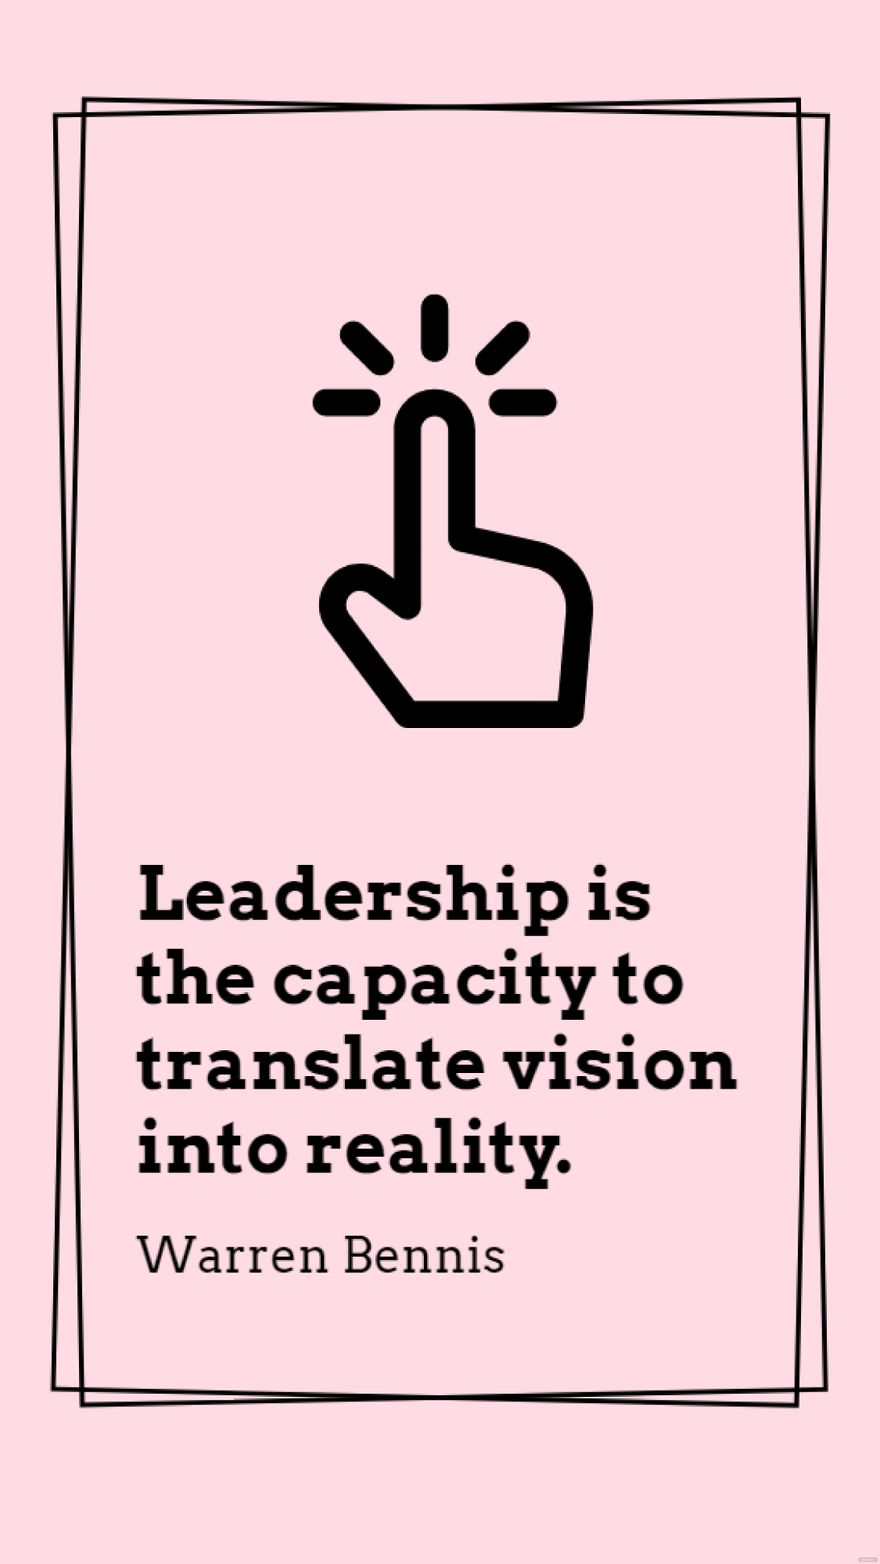 Warren Bennis - Leadership is the capacity to translate vision into reality.